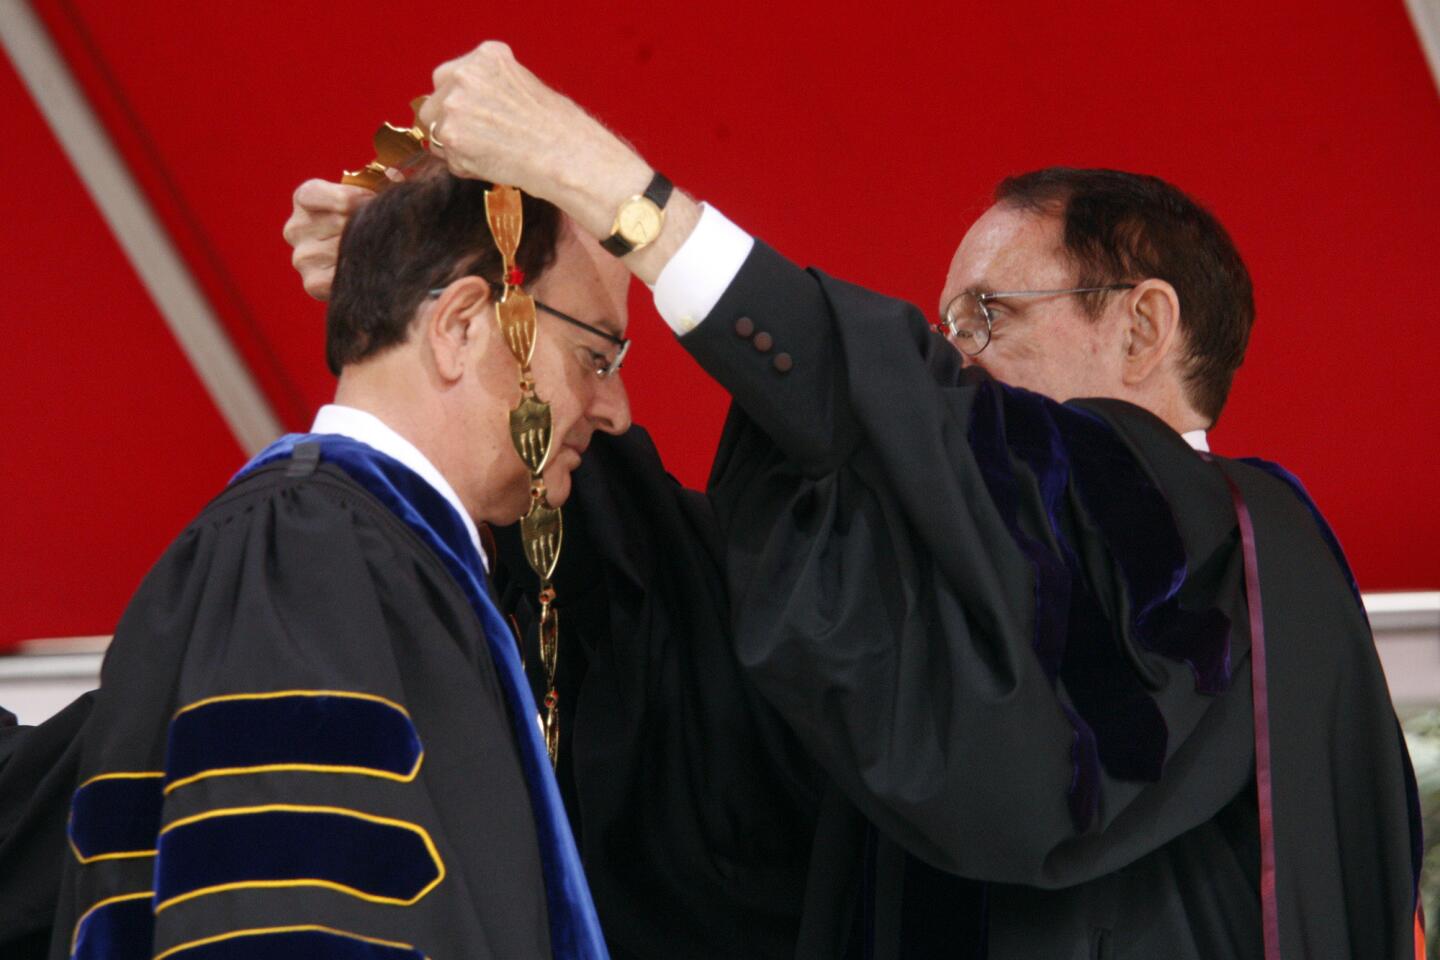 Entrepreneur and philanthropist George L. Pla receives honorary doctorate  at Cal State LA Commencement